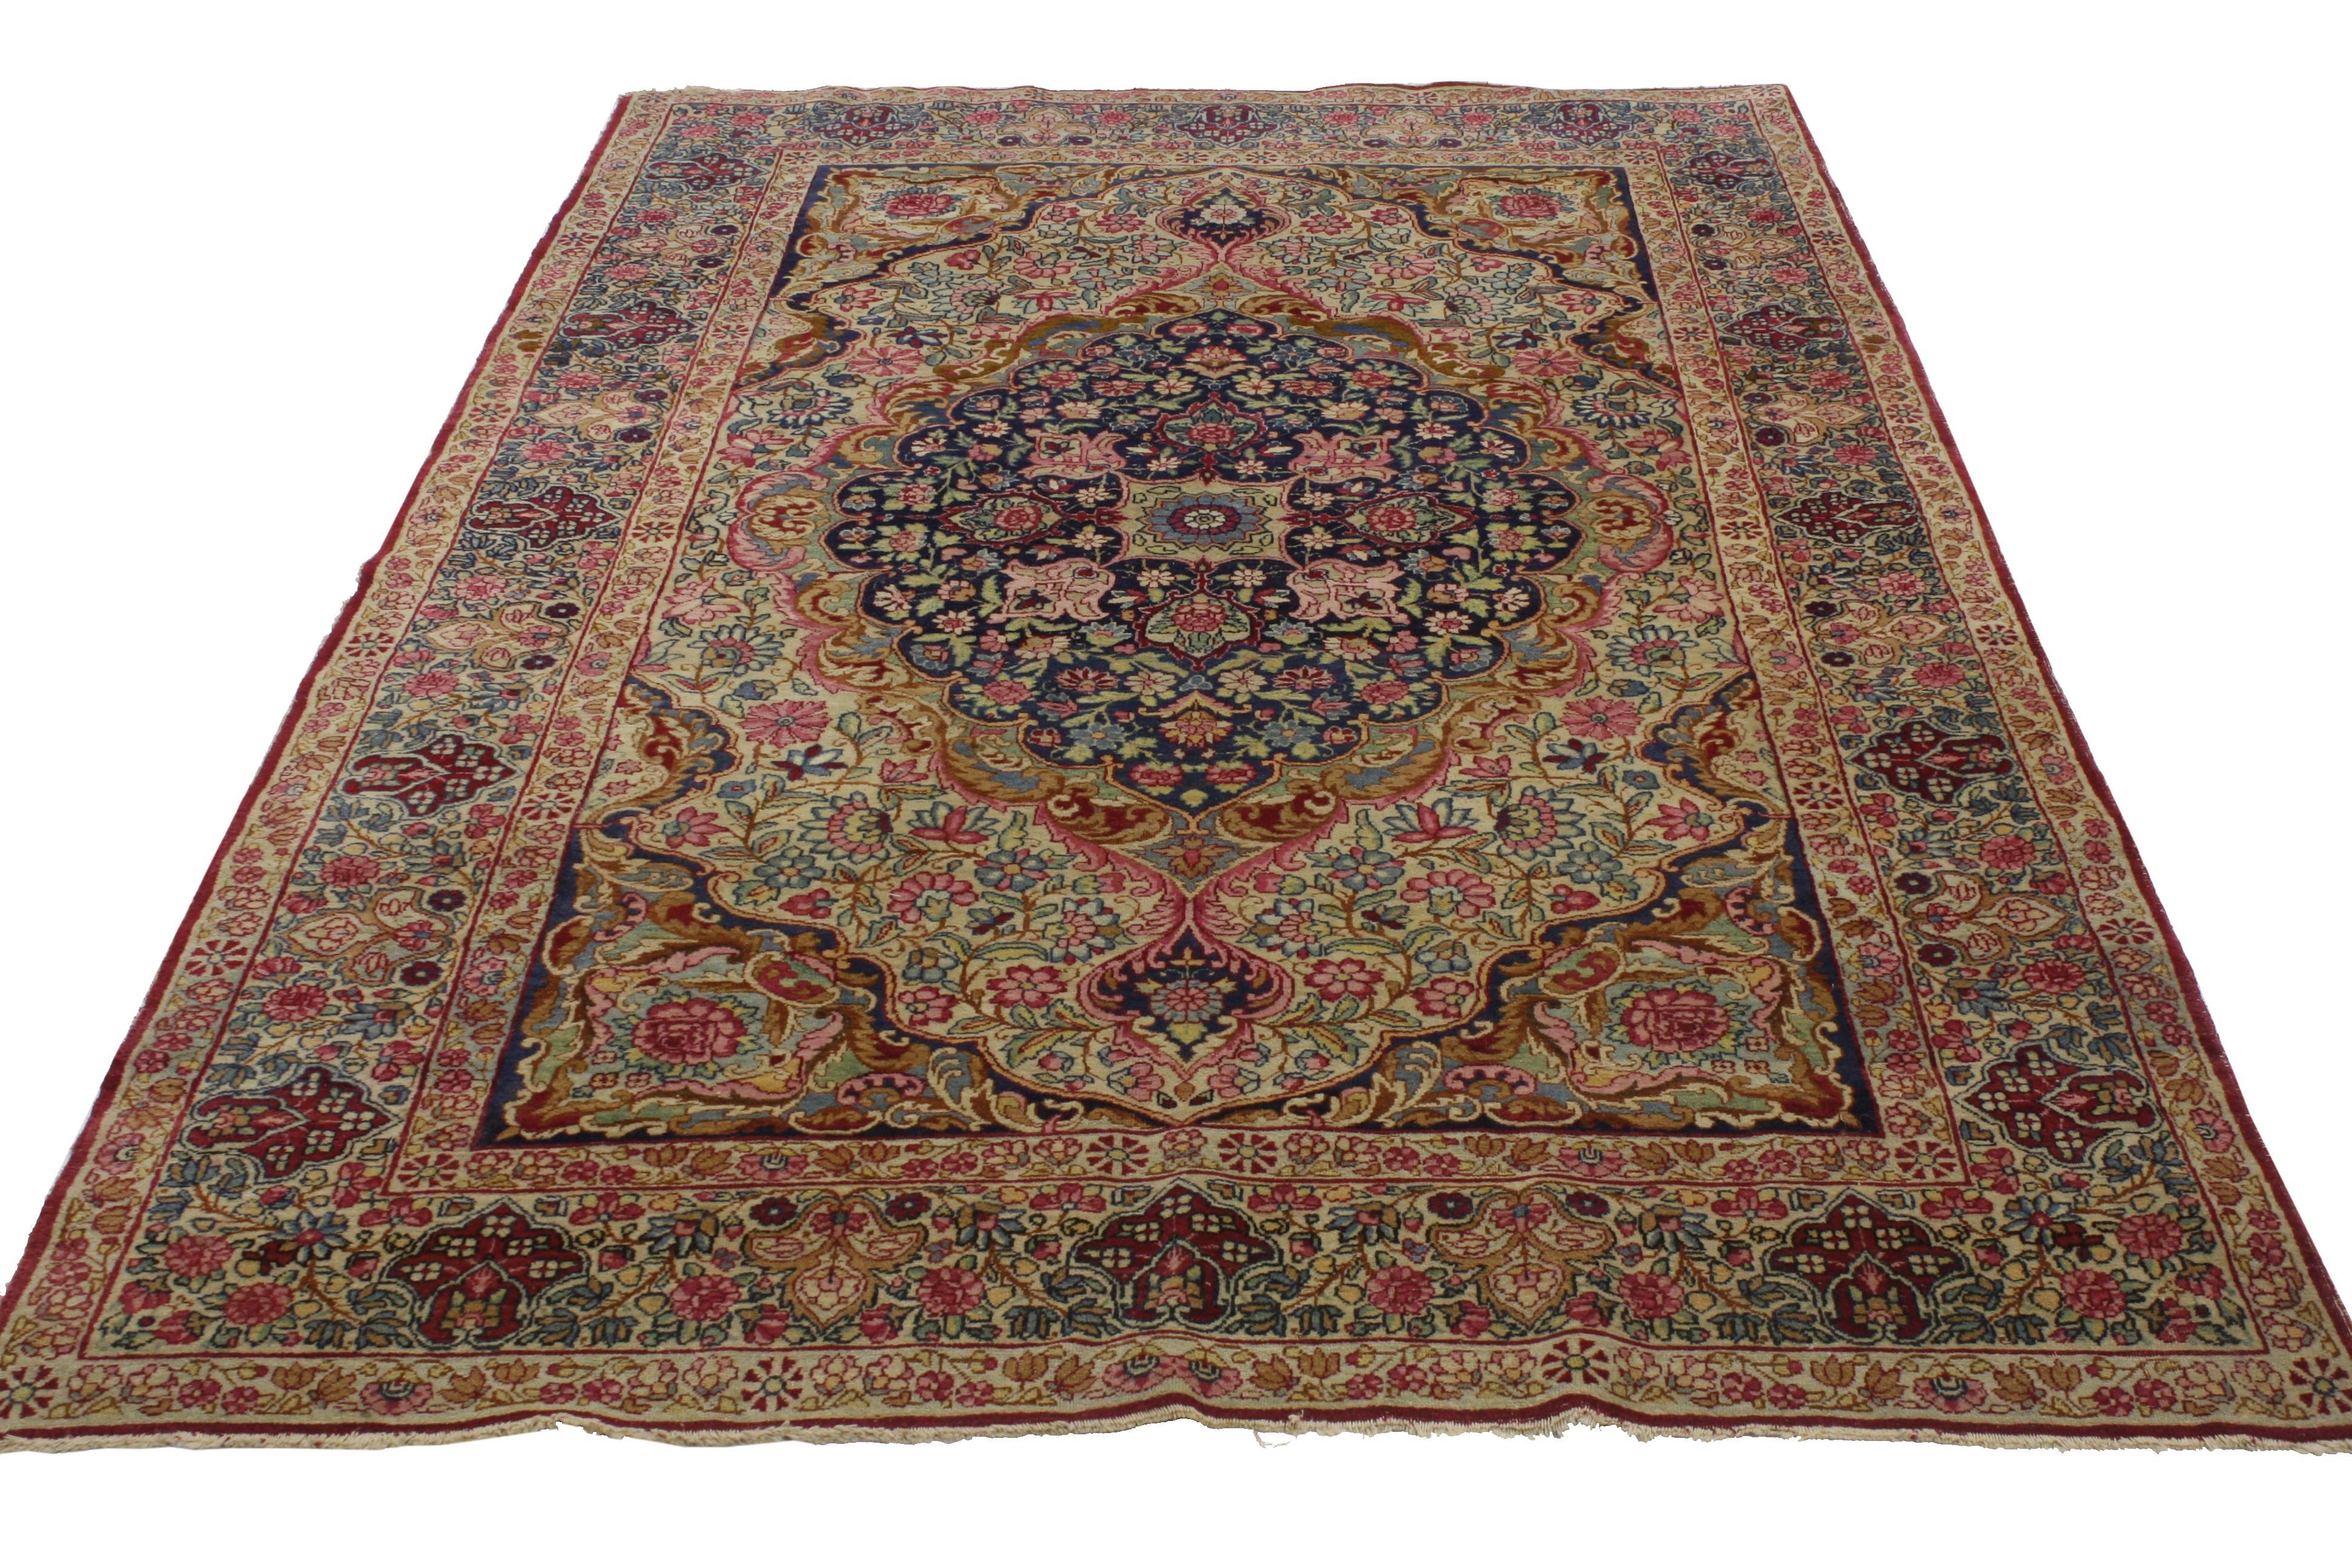 Hand-Knotted Late 19th Century Antique Persian Kermanshah Rug with Art Nouveau Style